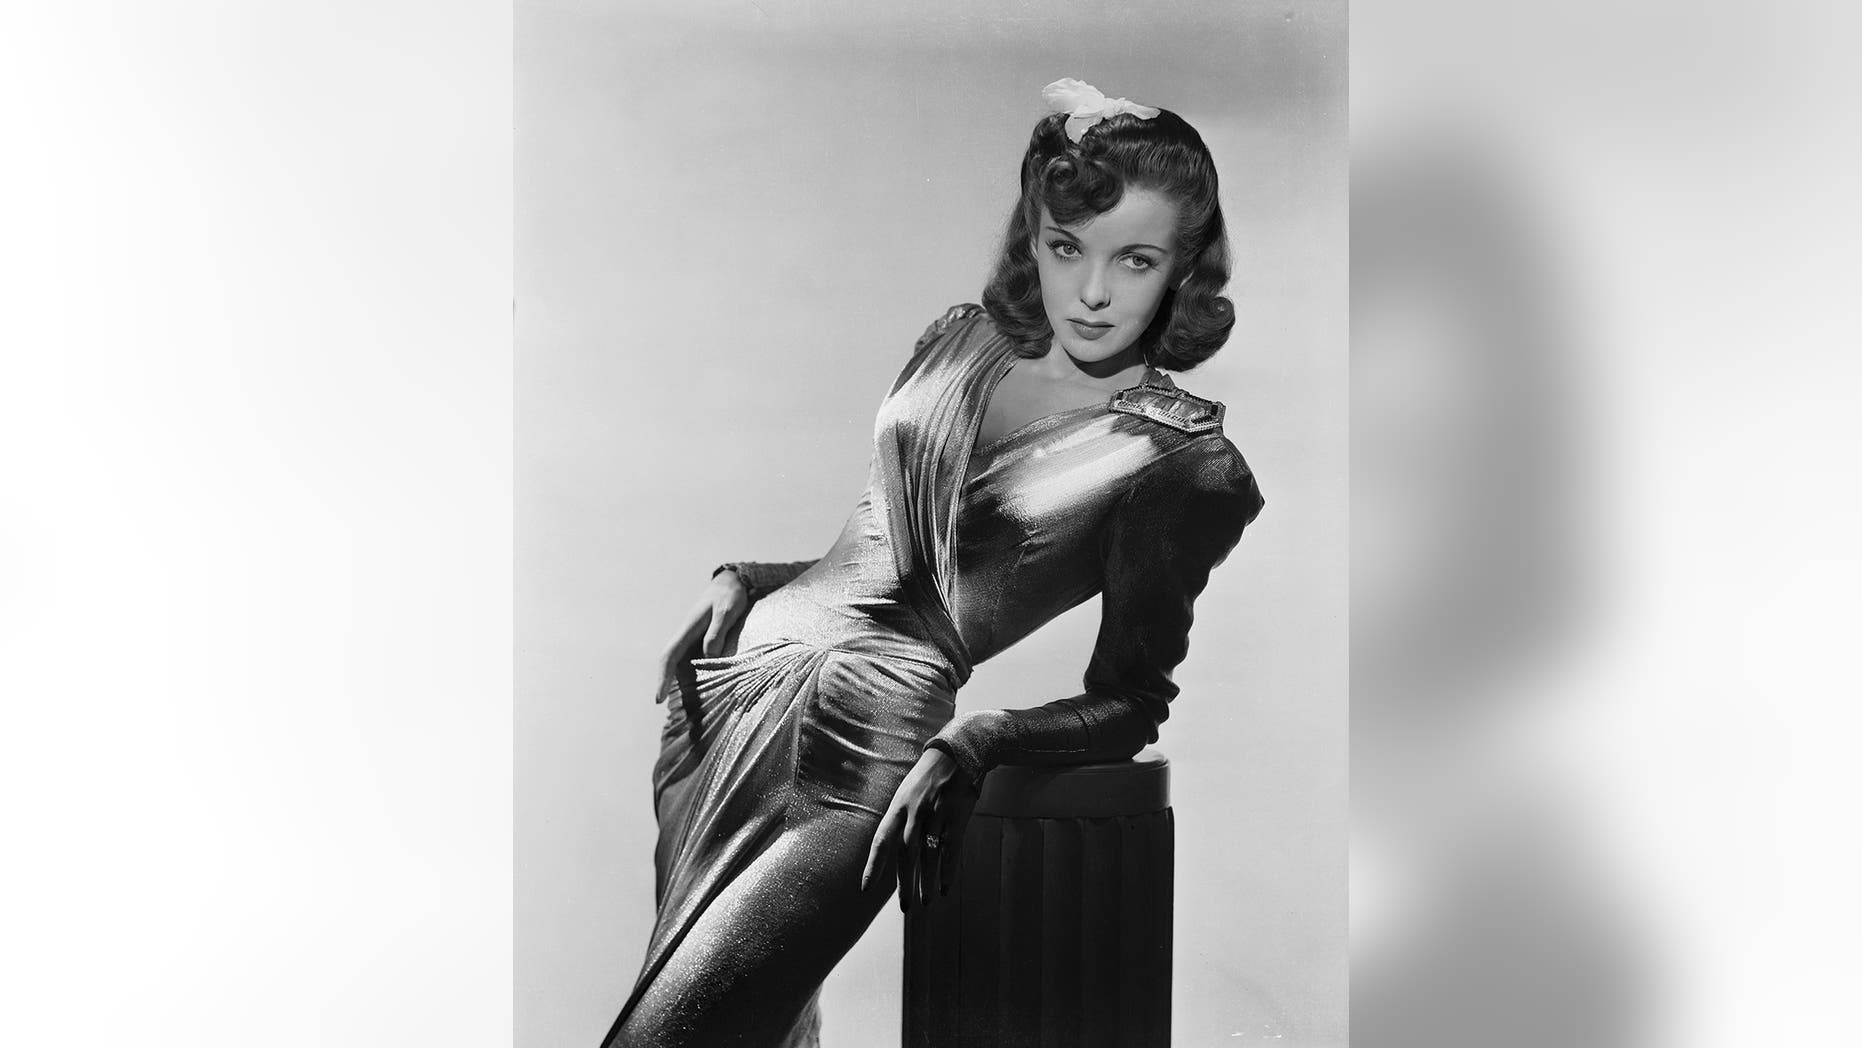 Ida Lupino was a recluse in her final years, never saw herself as a feminist in Hollywood, says pal